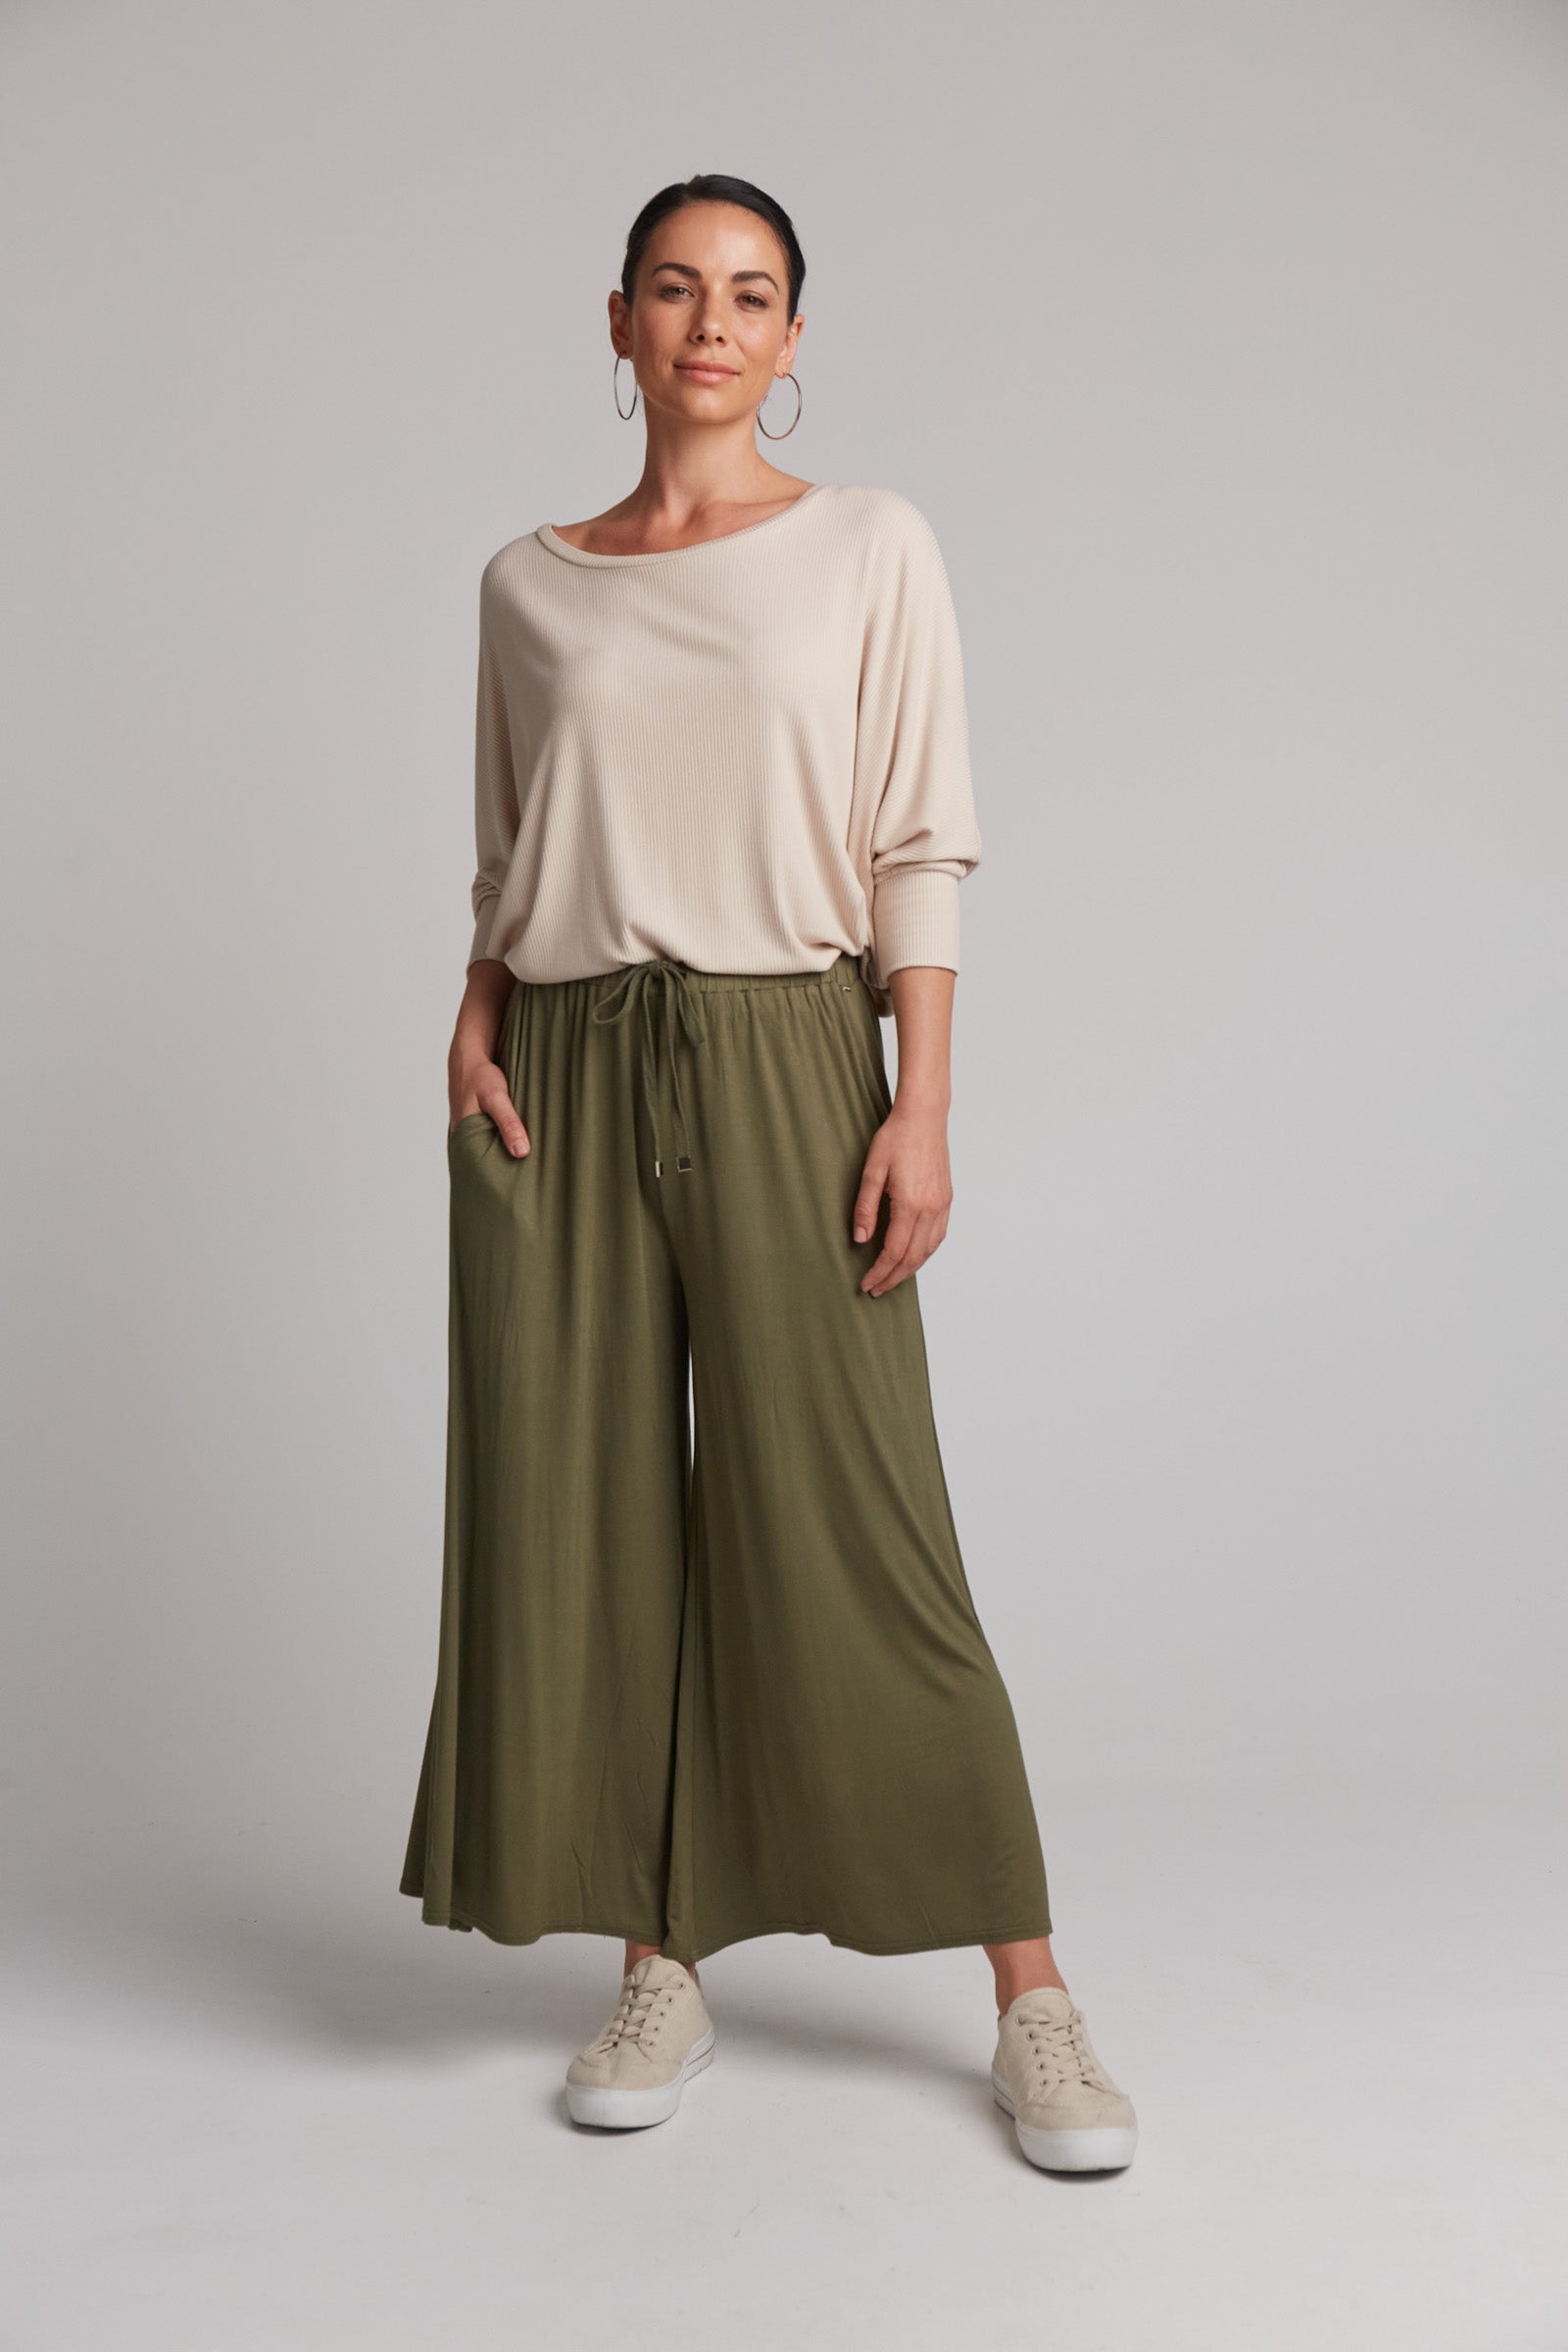 Studio Jersey Tie Pant - Fern - eb&ive Clothing - Pant Relaxed Jersey